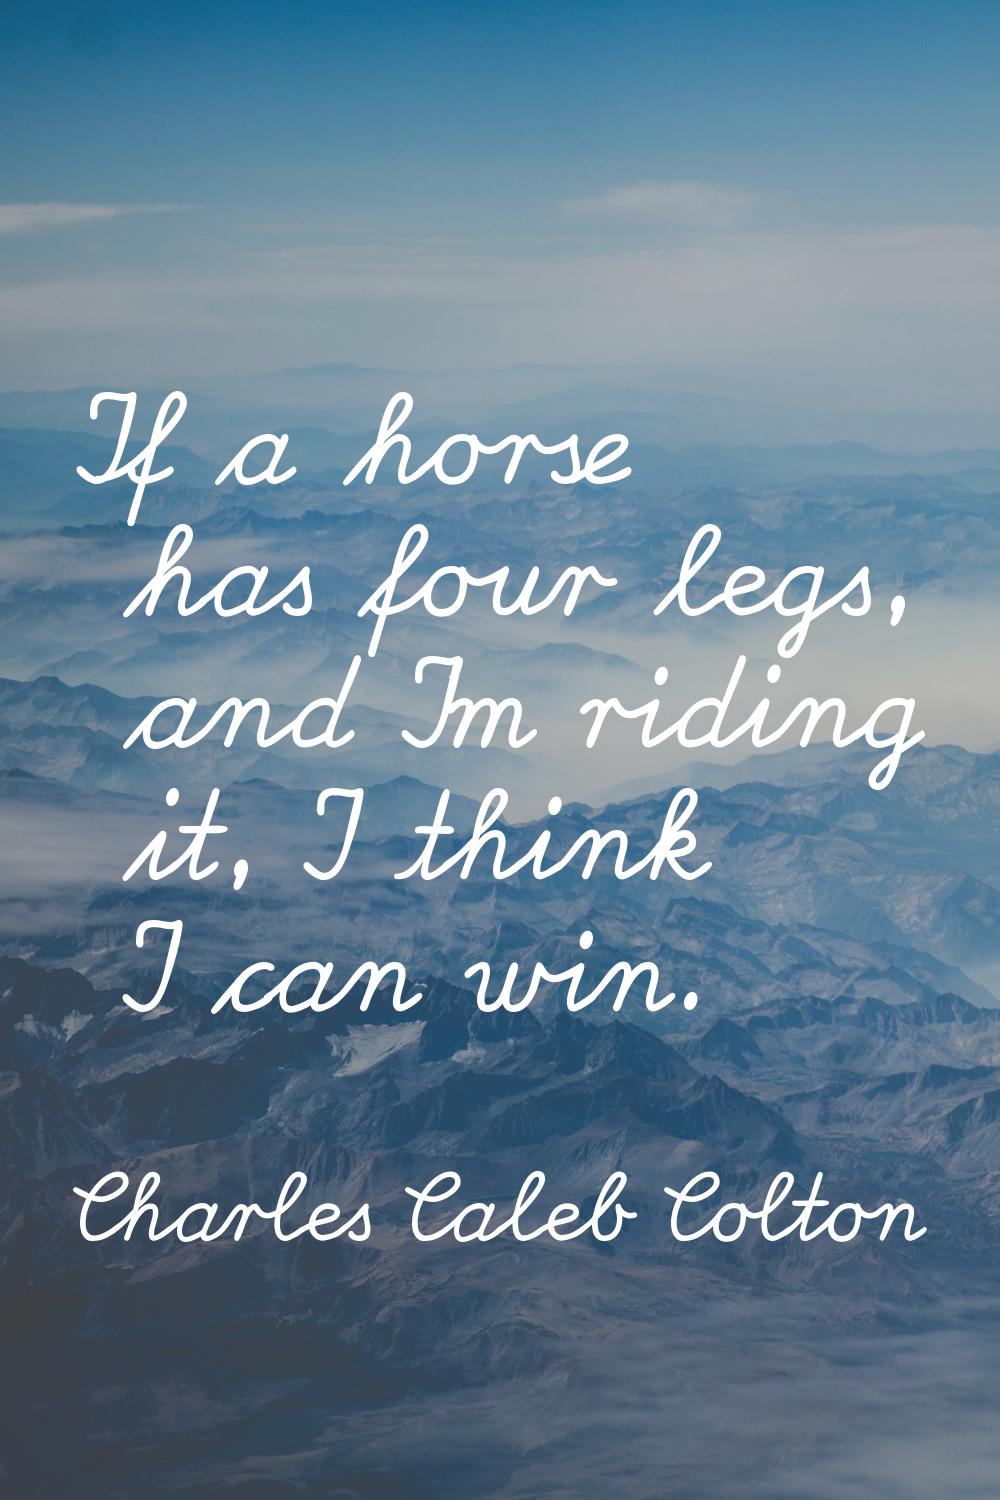 If a horse has four legs, and I'm riding it, I think I can win.